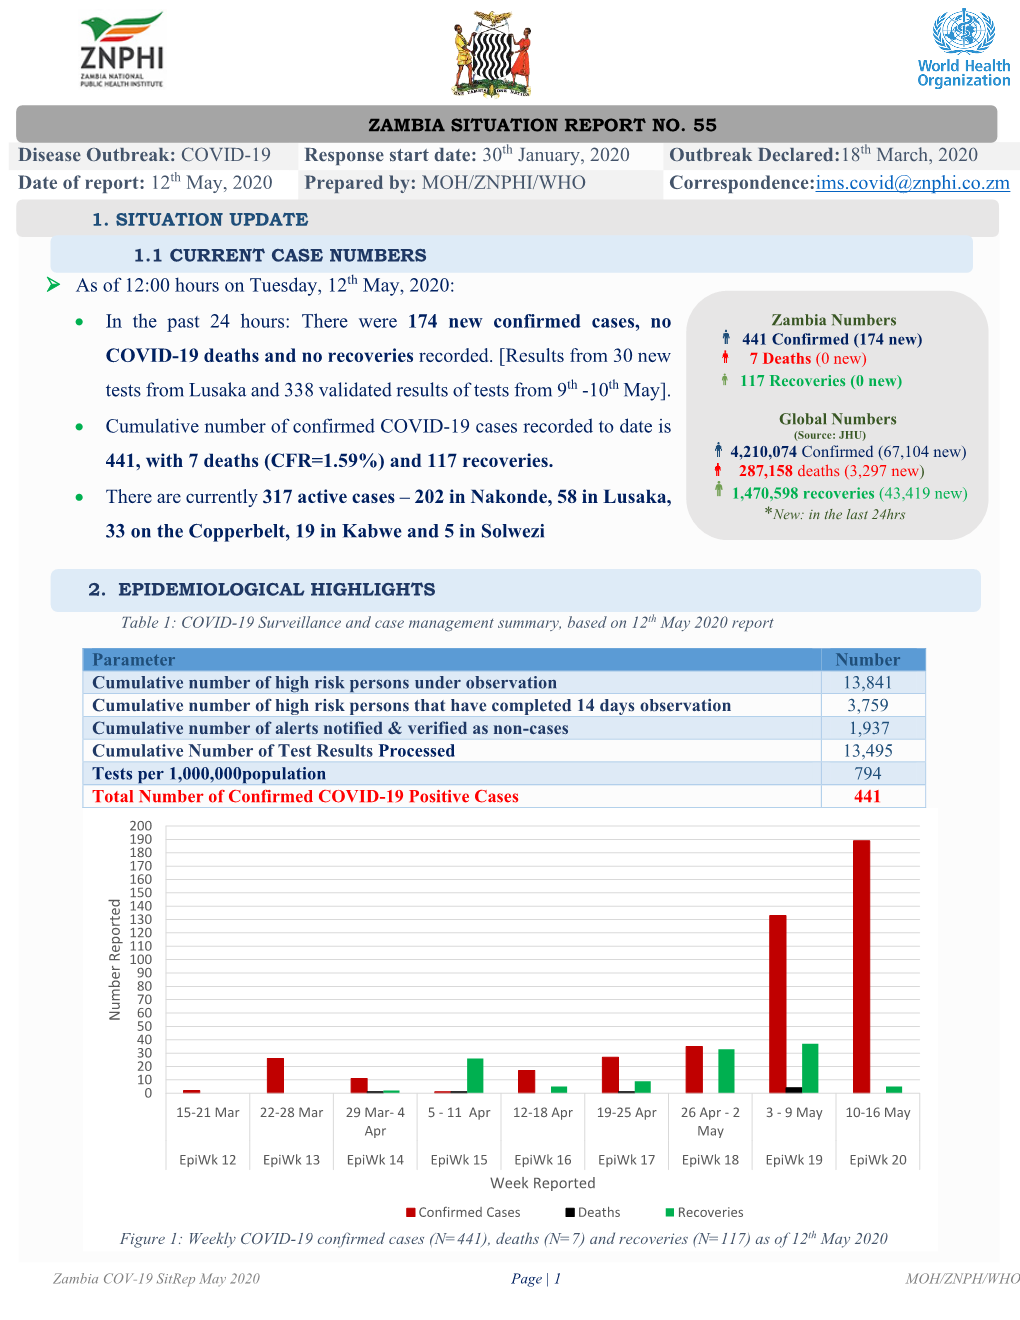 Outbreak Situation Report 55 | 12 May 2020